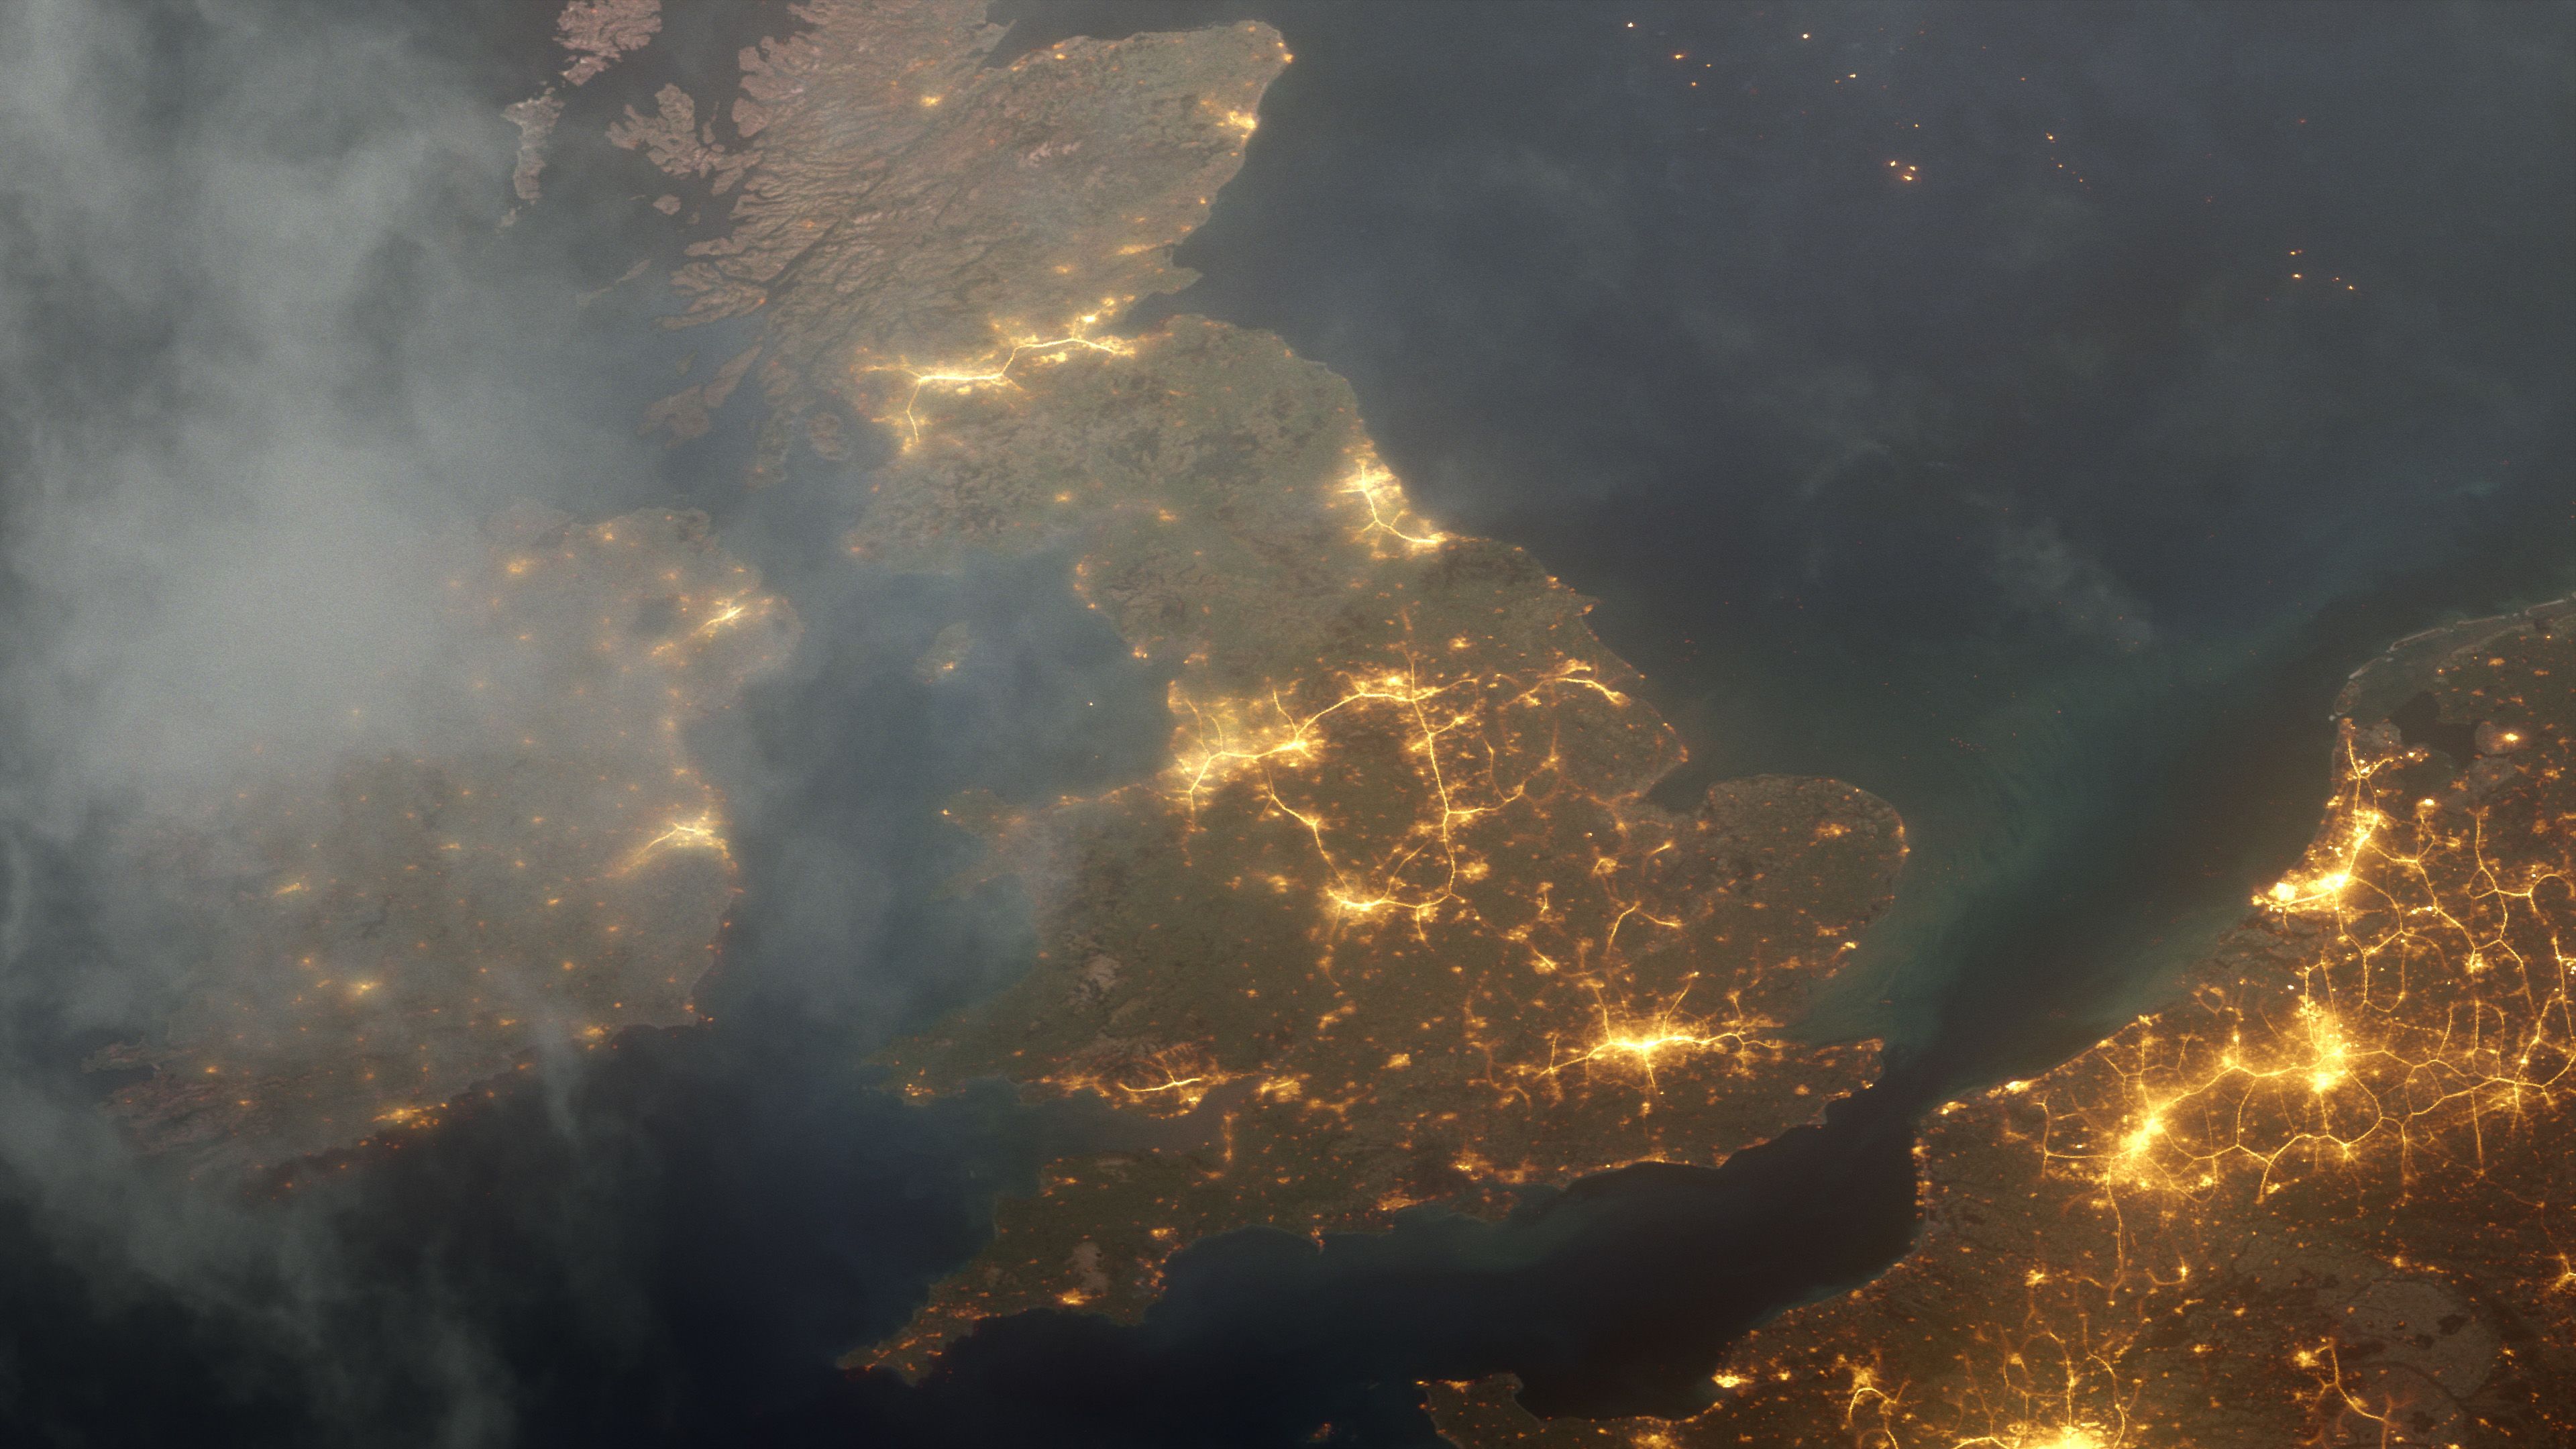 Satellite image of the UK at night. There are lights on across the country lighting up the image